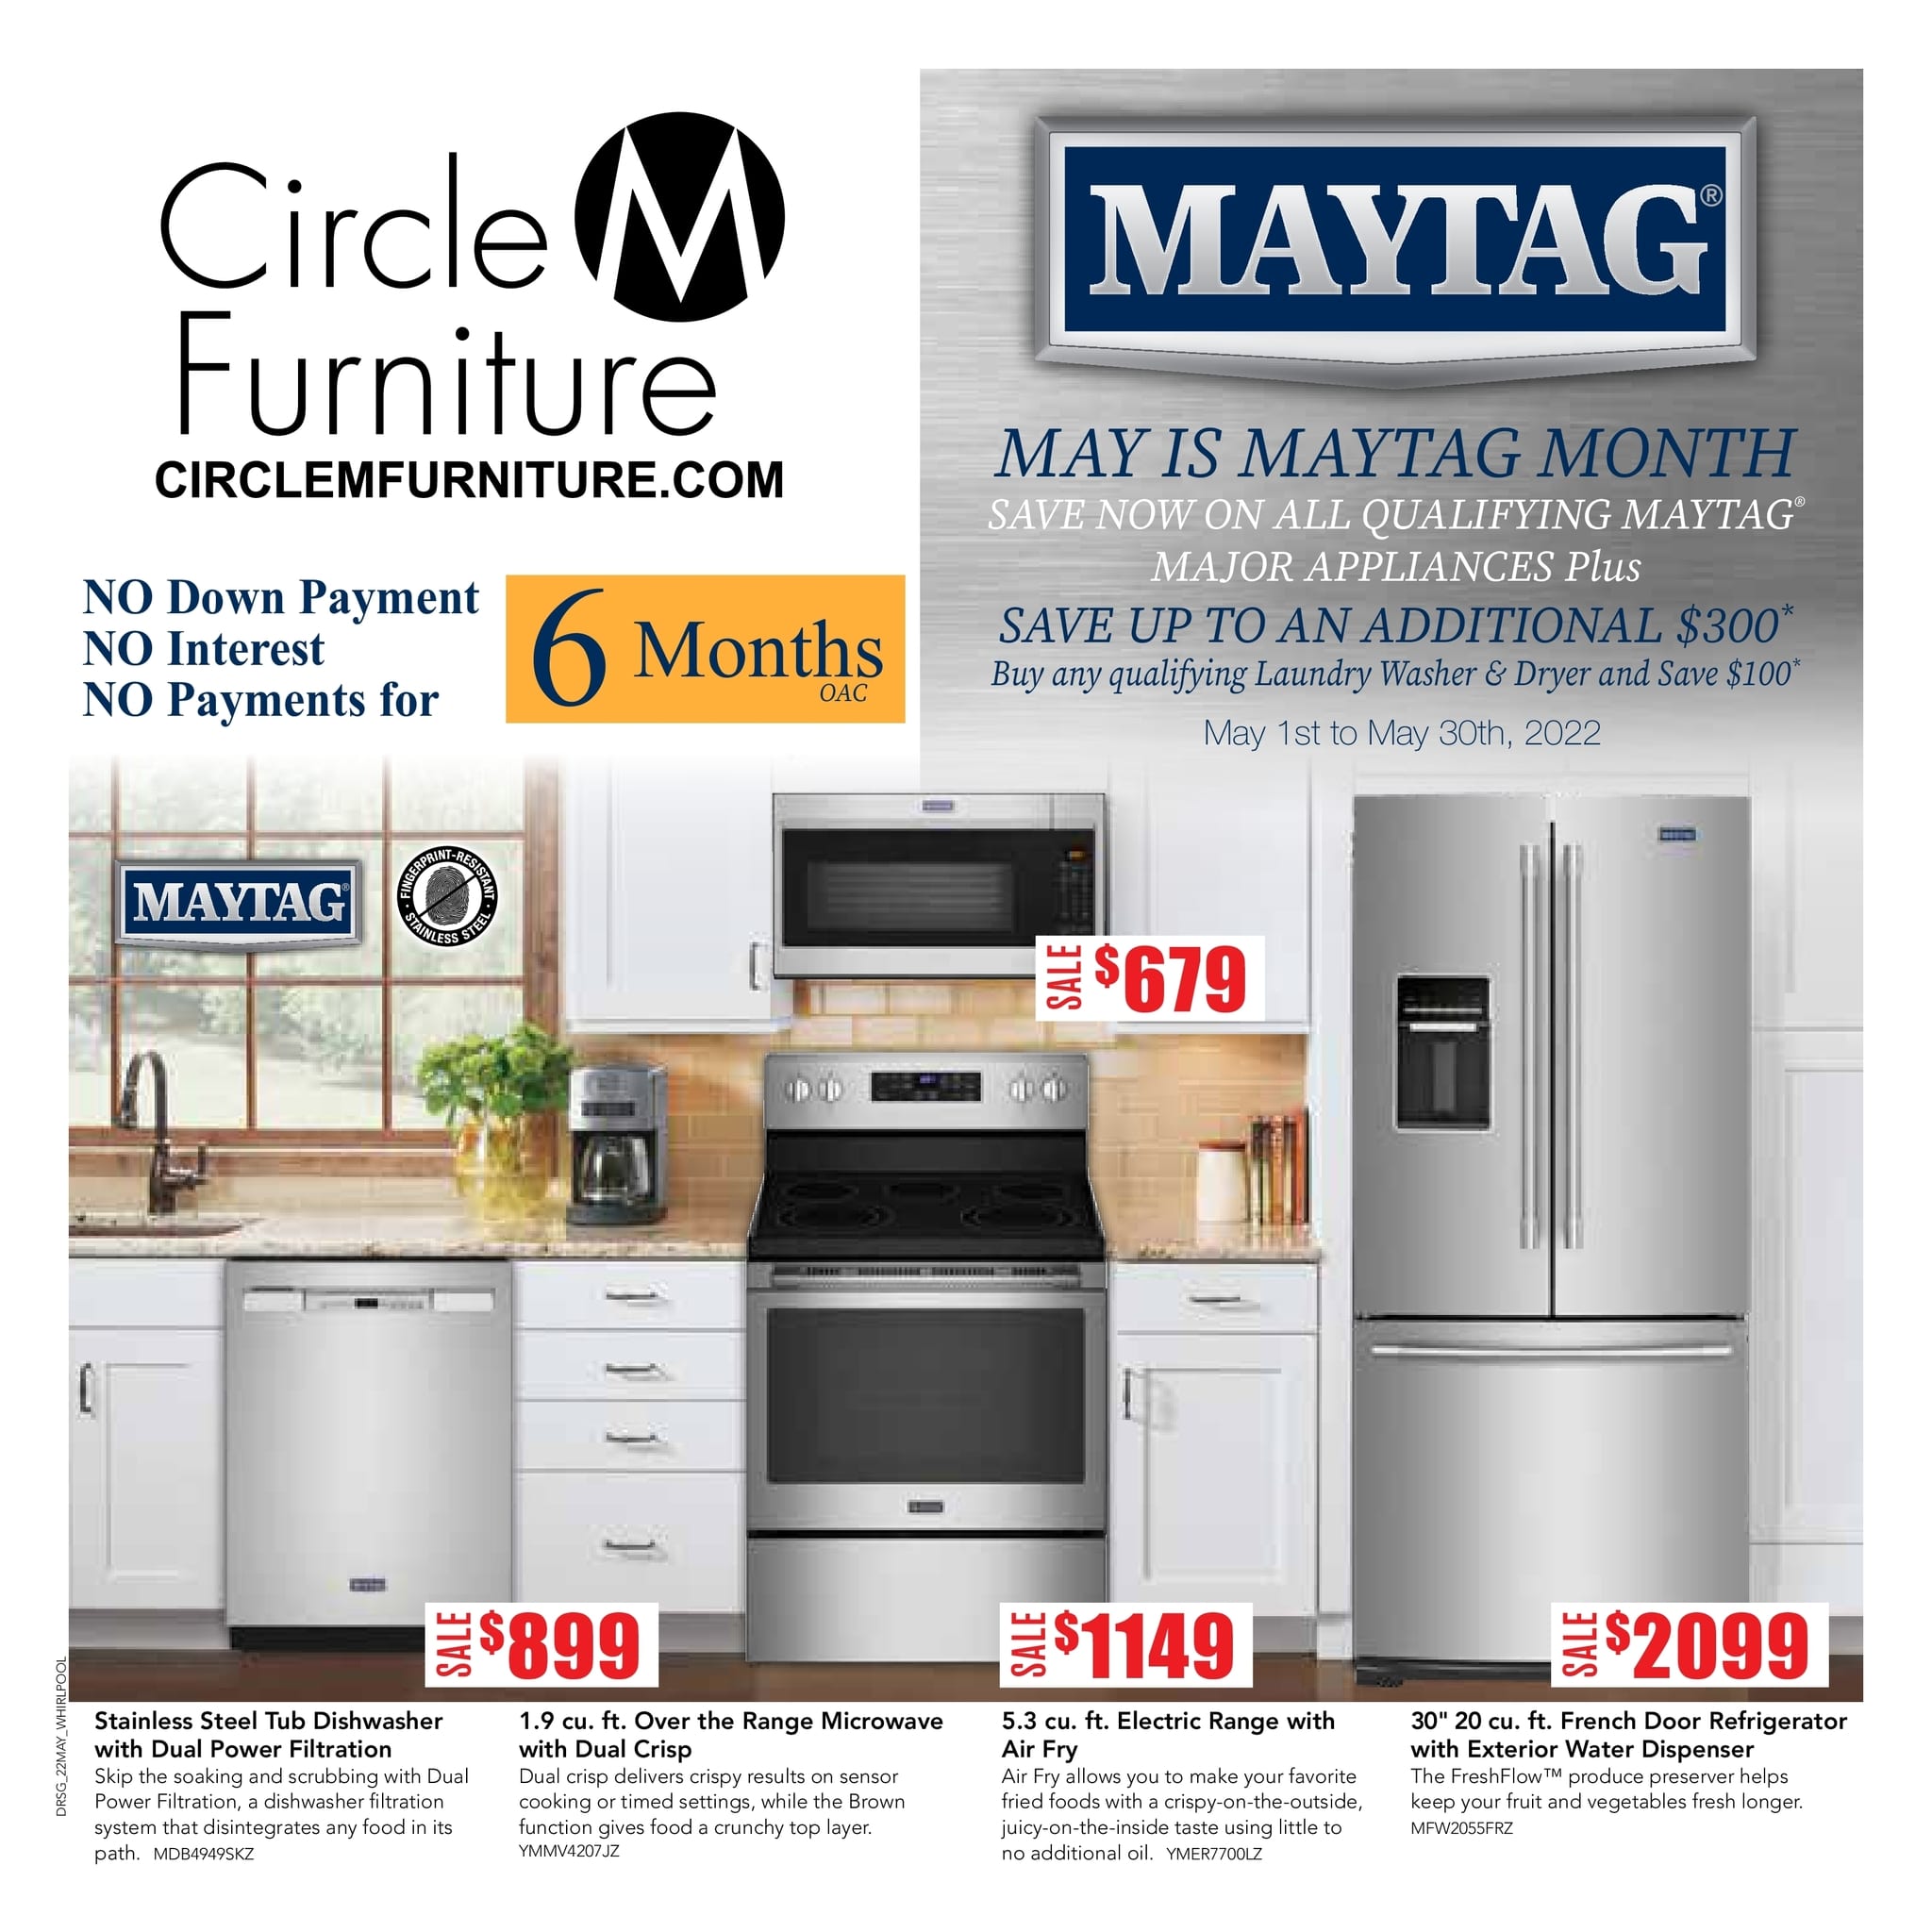 Circle M Furniture - May is Maytag Month